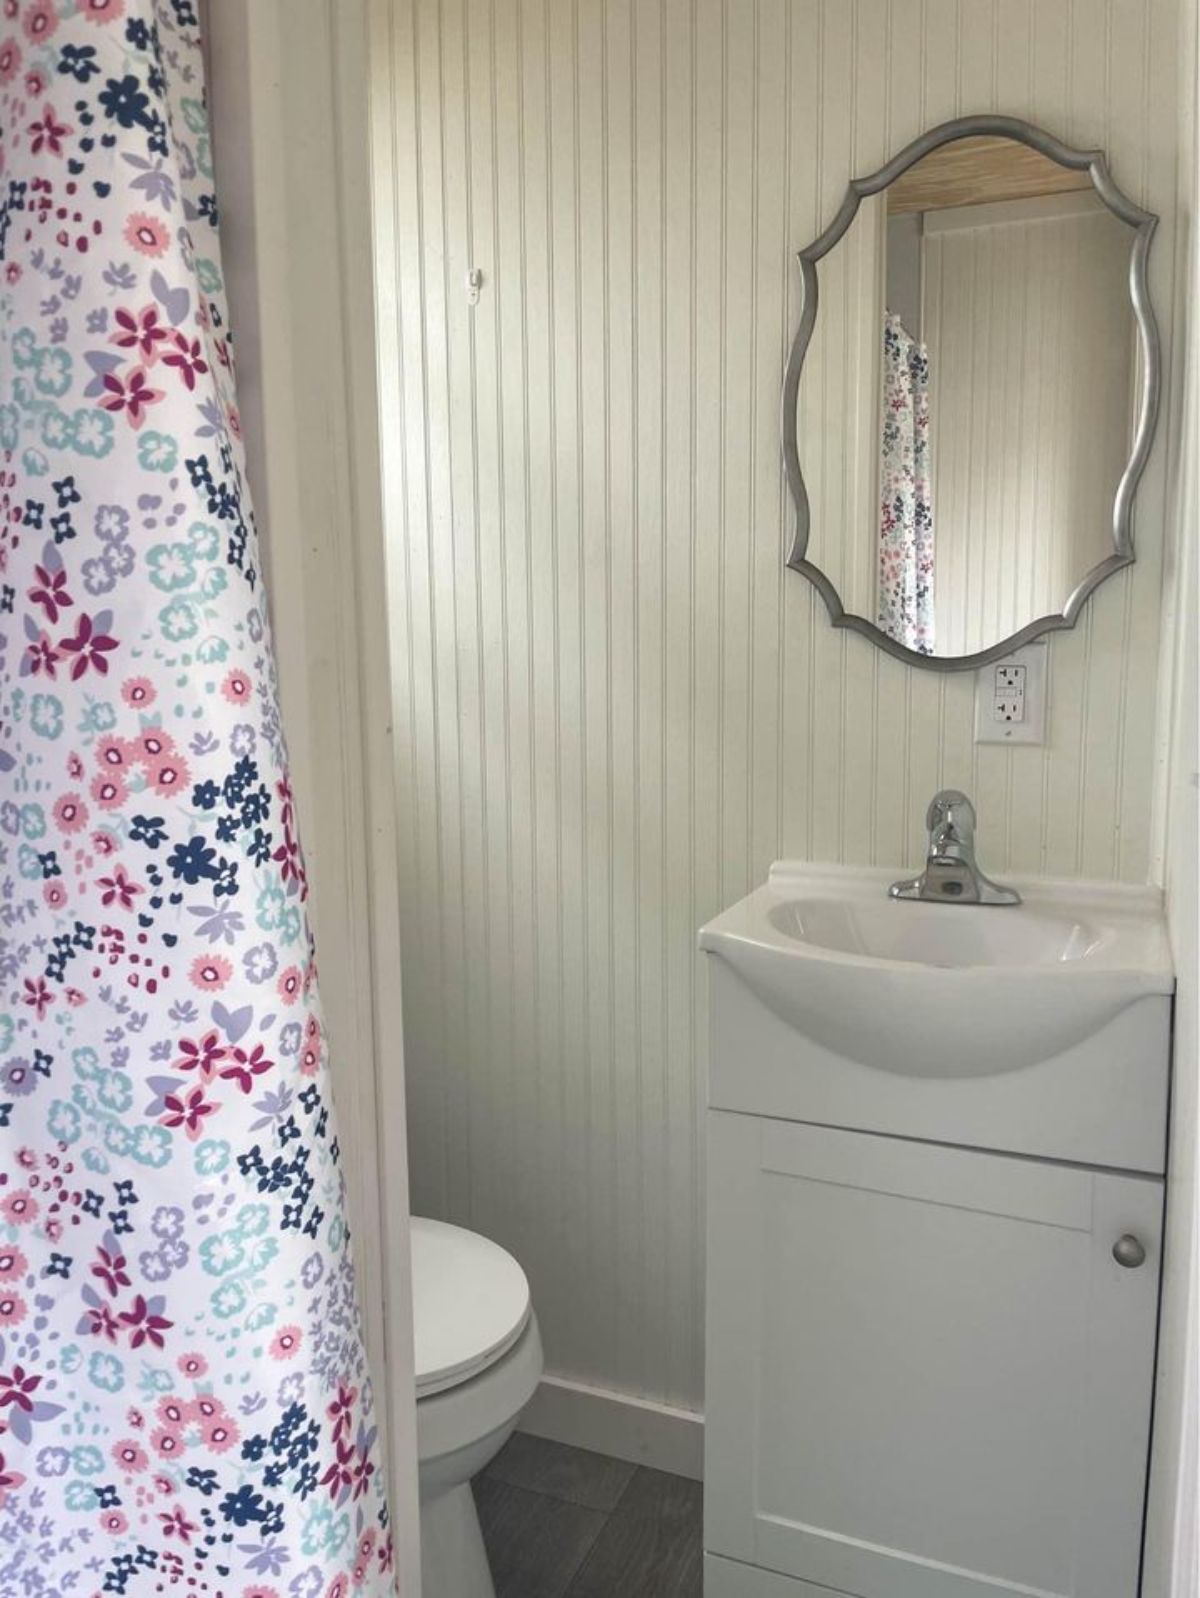 Bathroom of Brand New 35’ Tiny House has a sink with storage and mirror